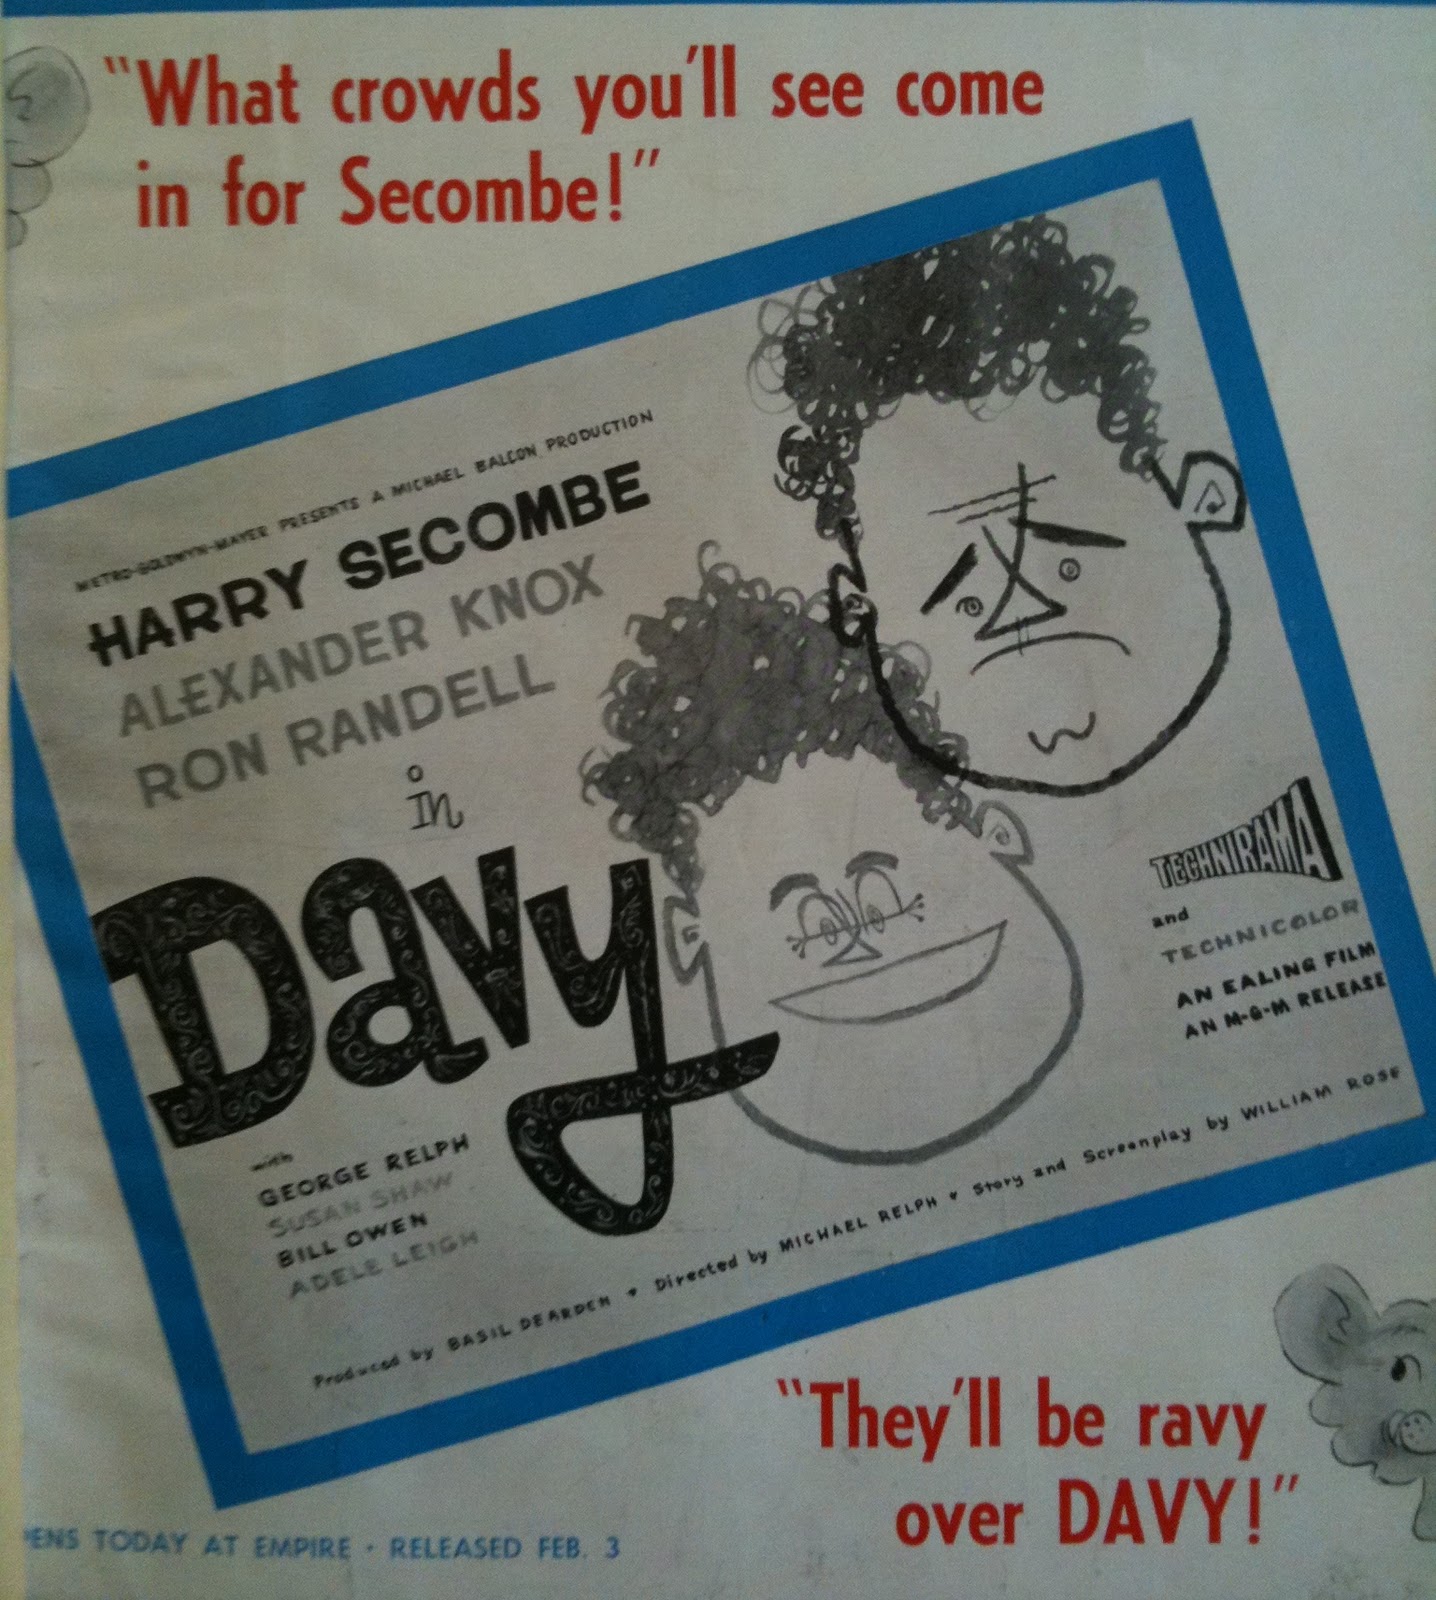 The Harry Secombe Show [1968-1973]